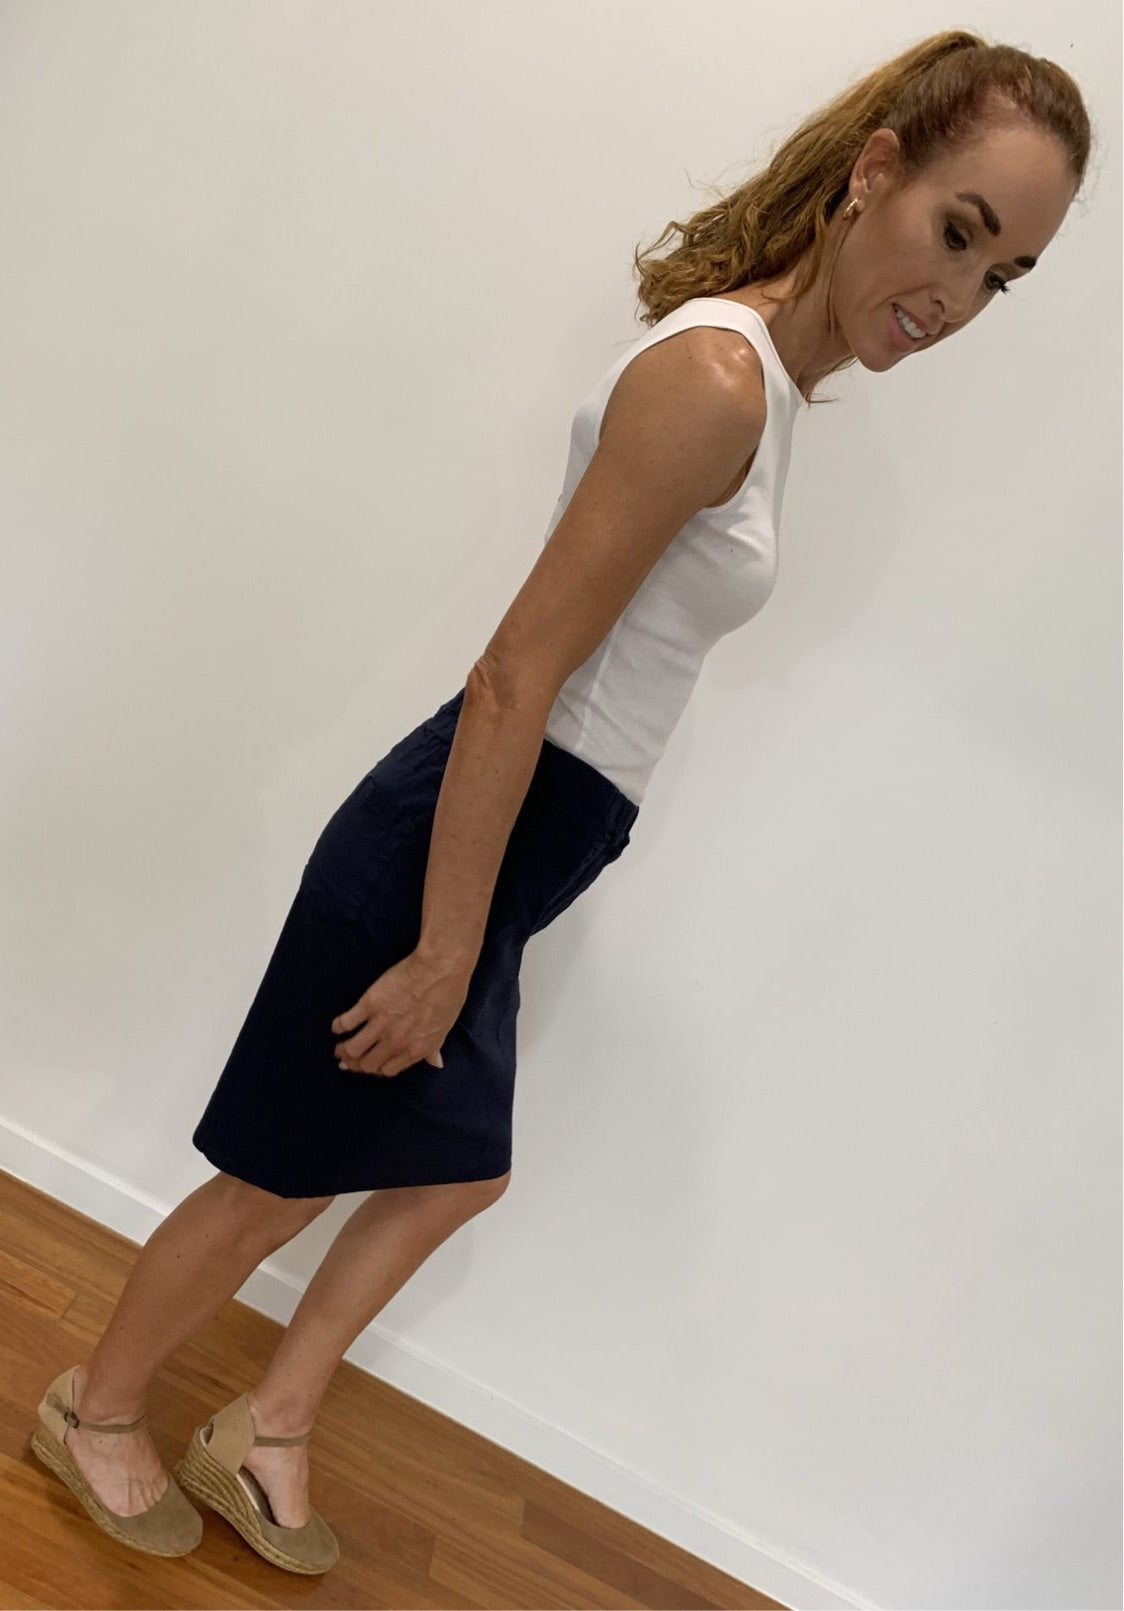 Short Skirt in Navy Blue Four Way Stretch Linen Blend Super Elastic & Comfortable - Willow Tree